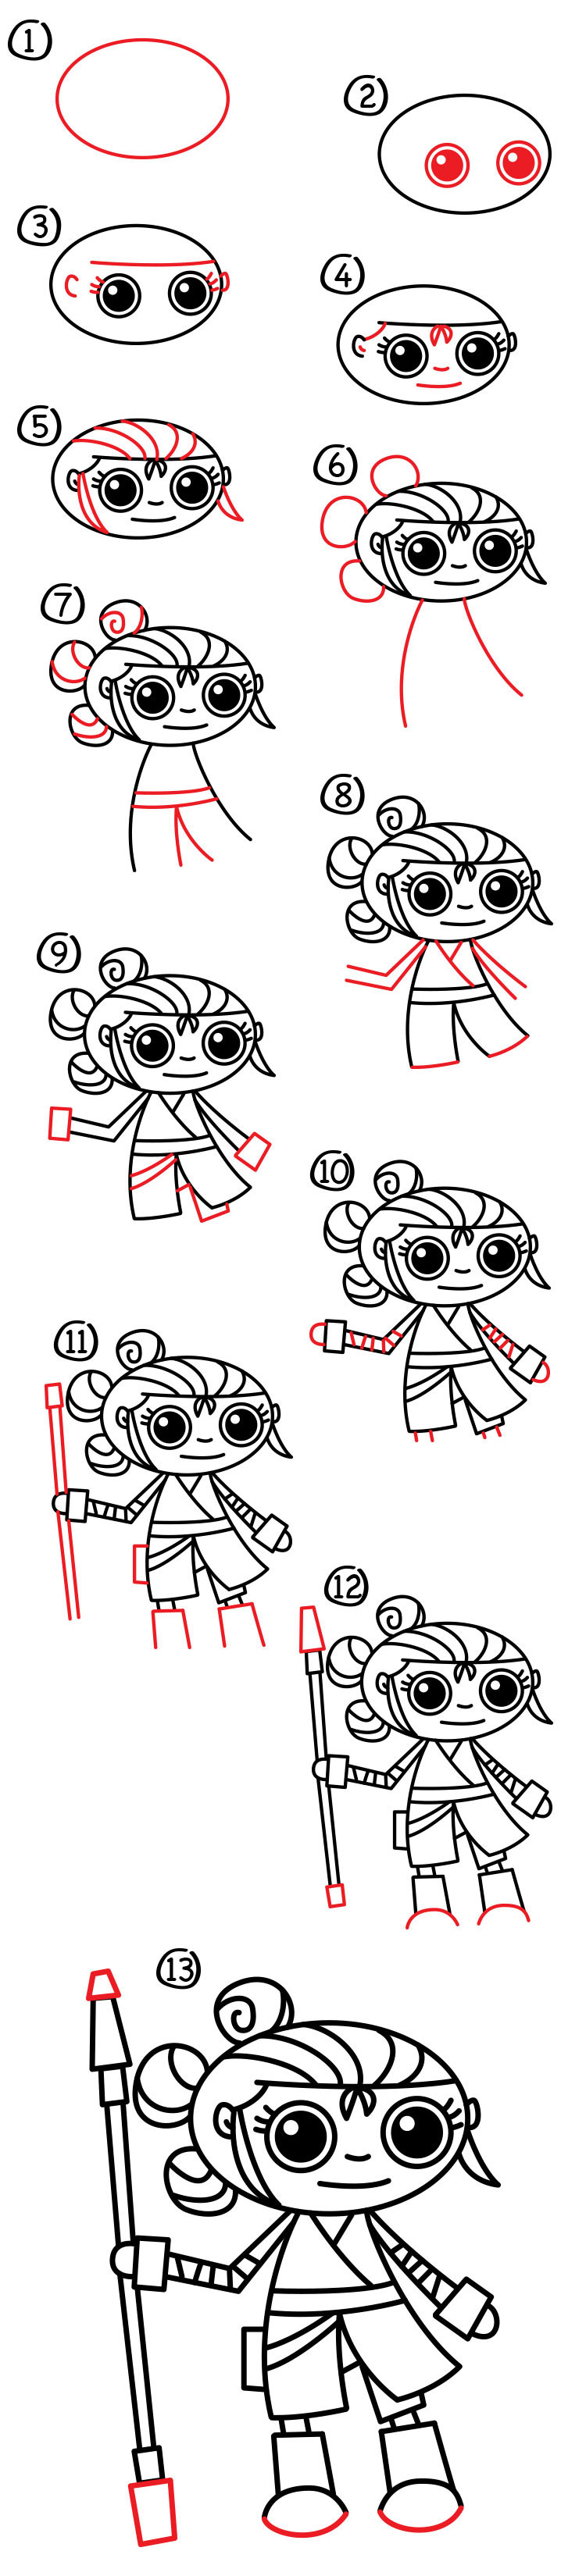 How To Draw A Cartoon Rey From Star Wars - Art For Kids Hub